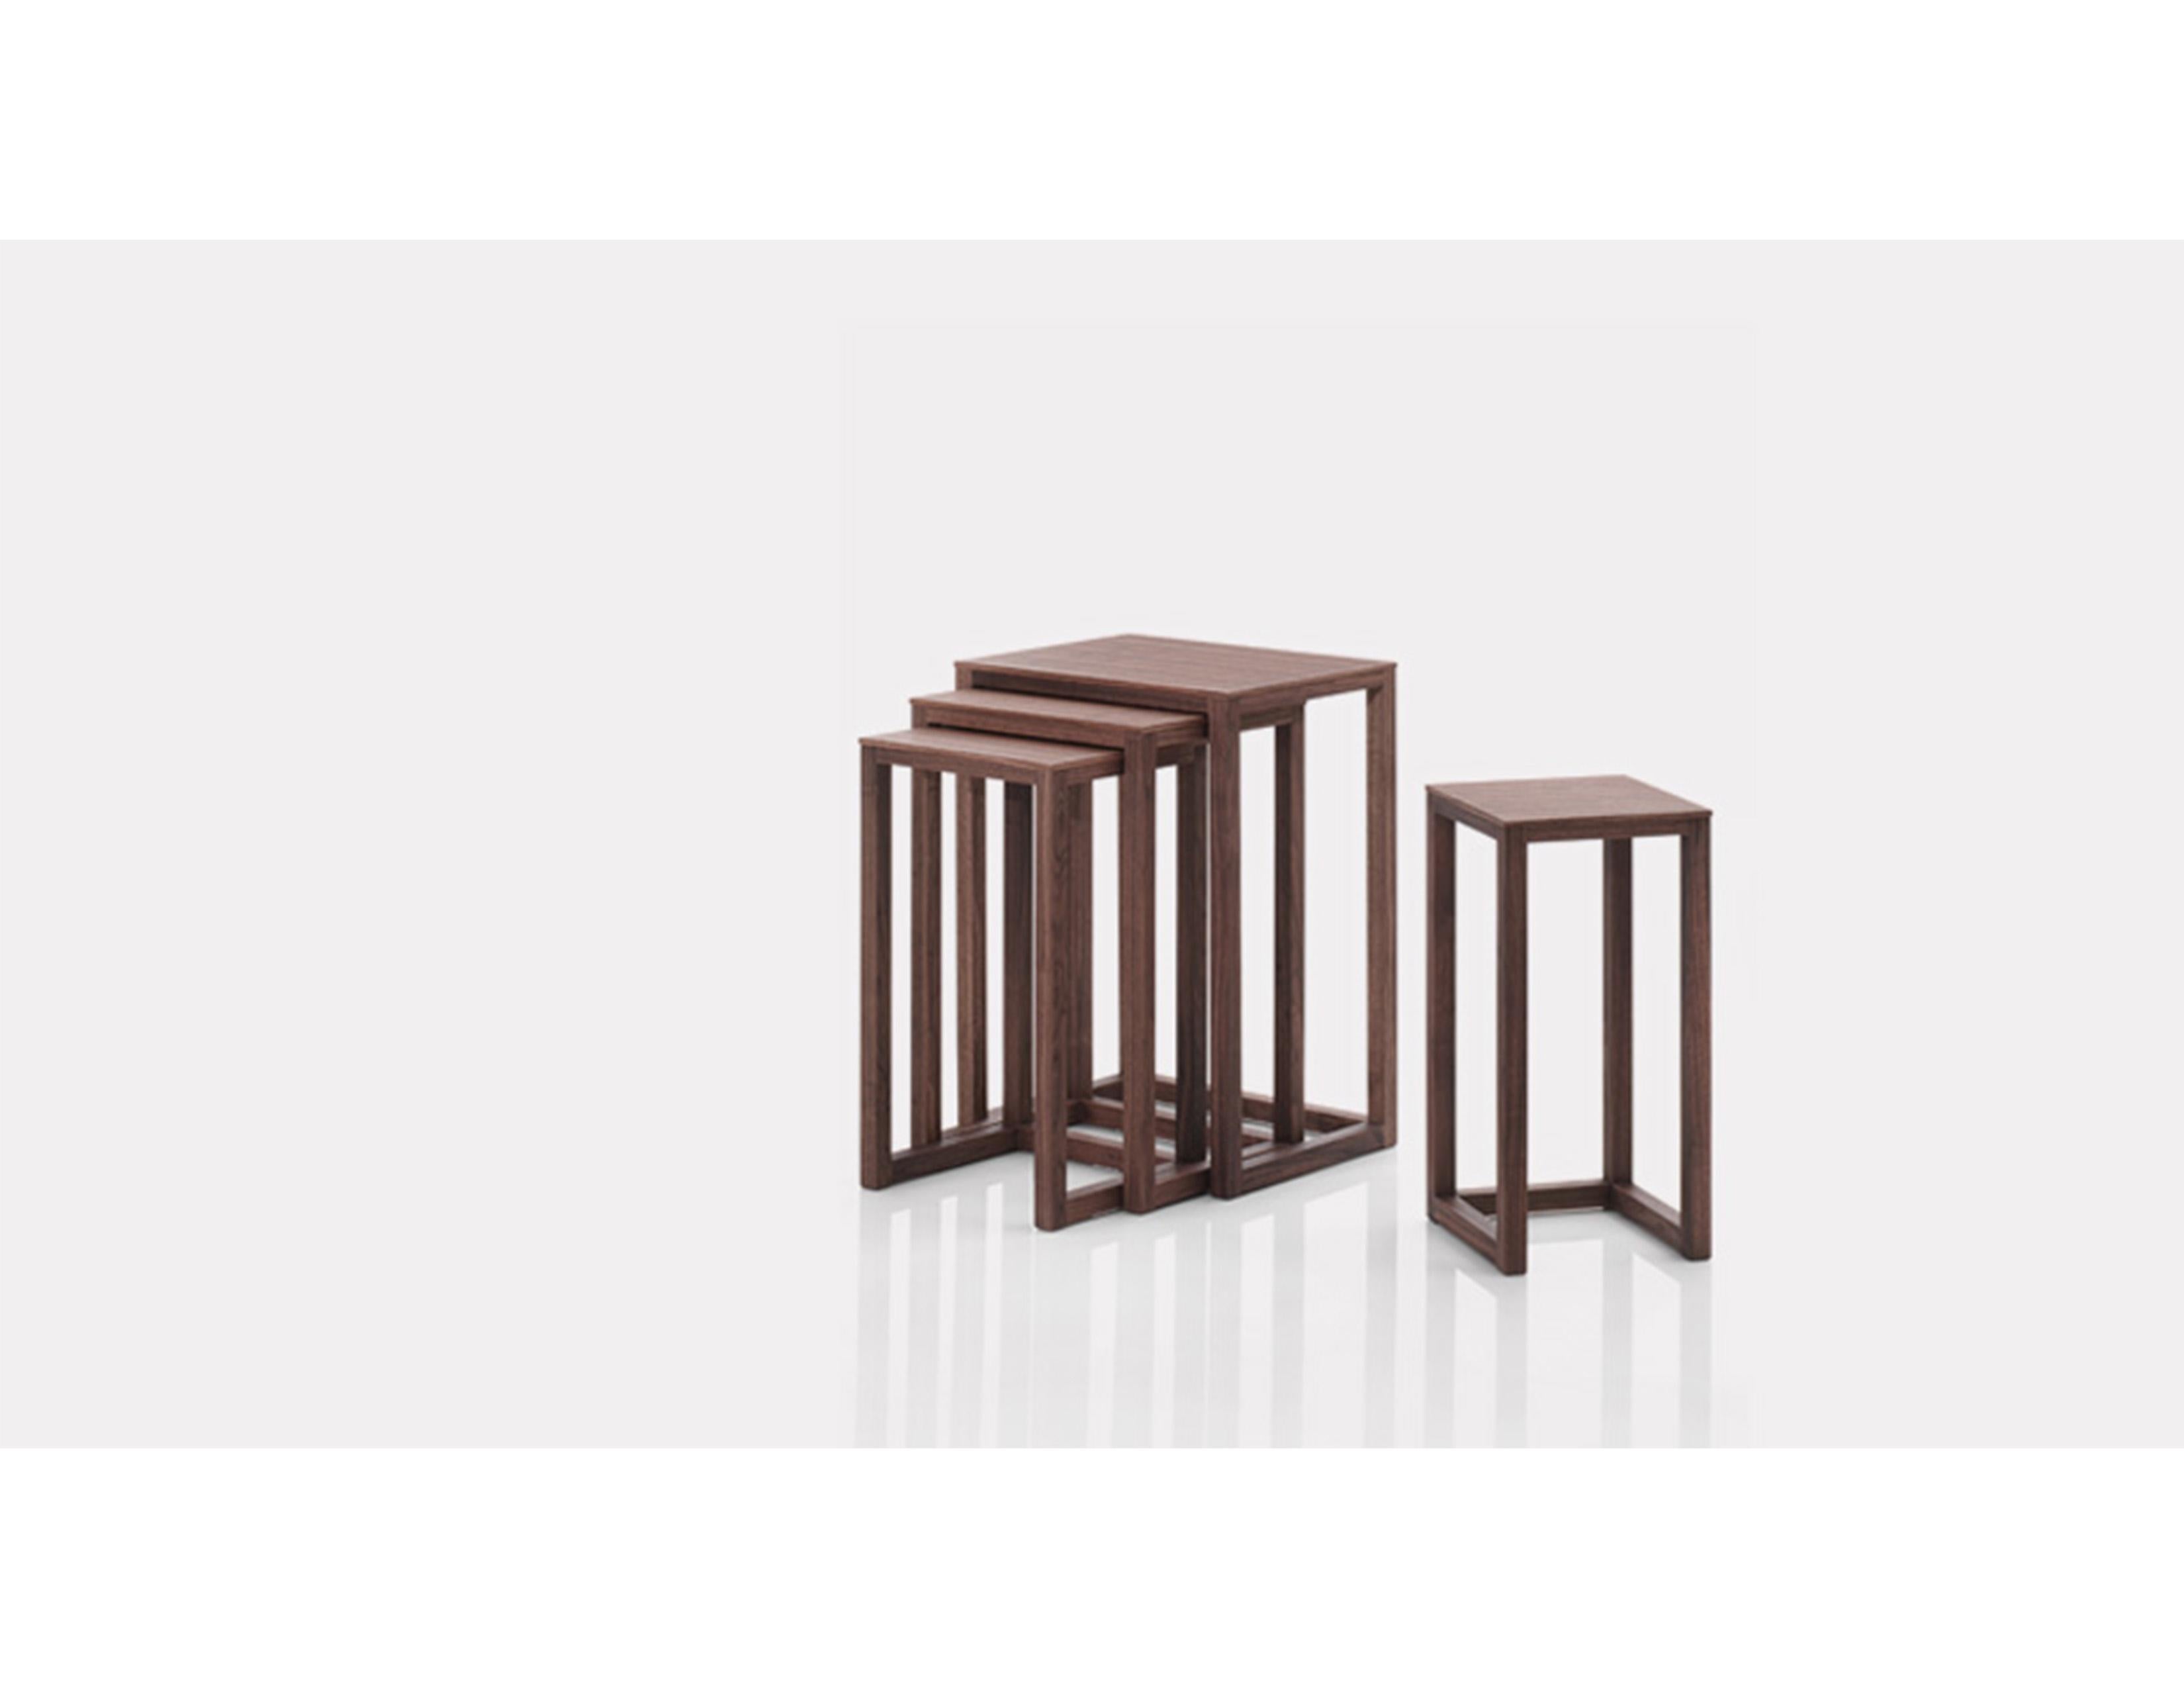 Wittmann Satztische Nesting Tables by Josef Hoffmann In New Condition For Sale In New York, NY